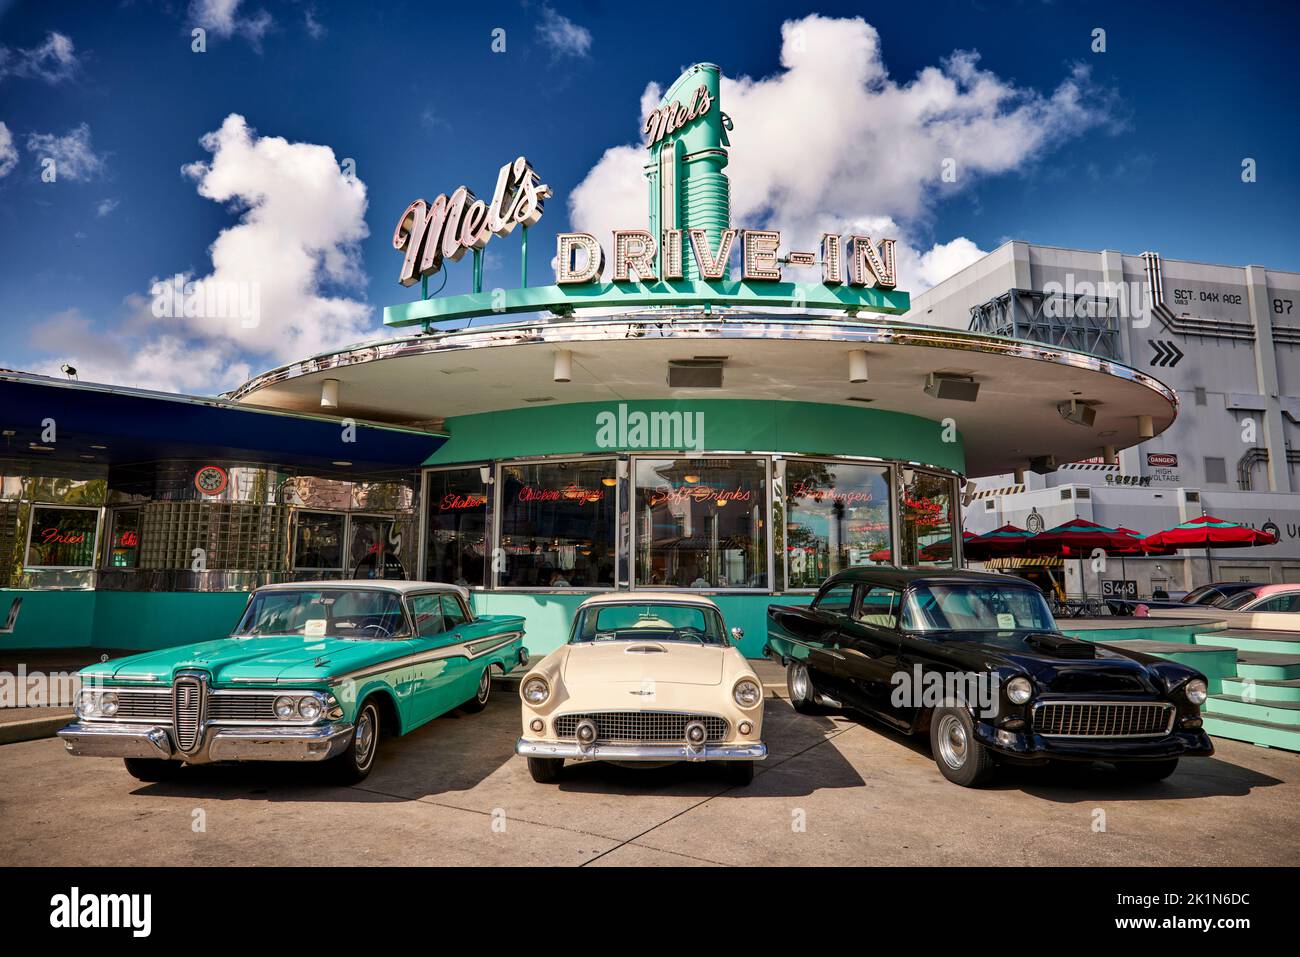 Universal Studios Florida theme park Mels drive in cafe with 1960’s American classic cars Stock Photo